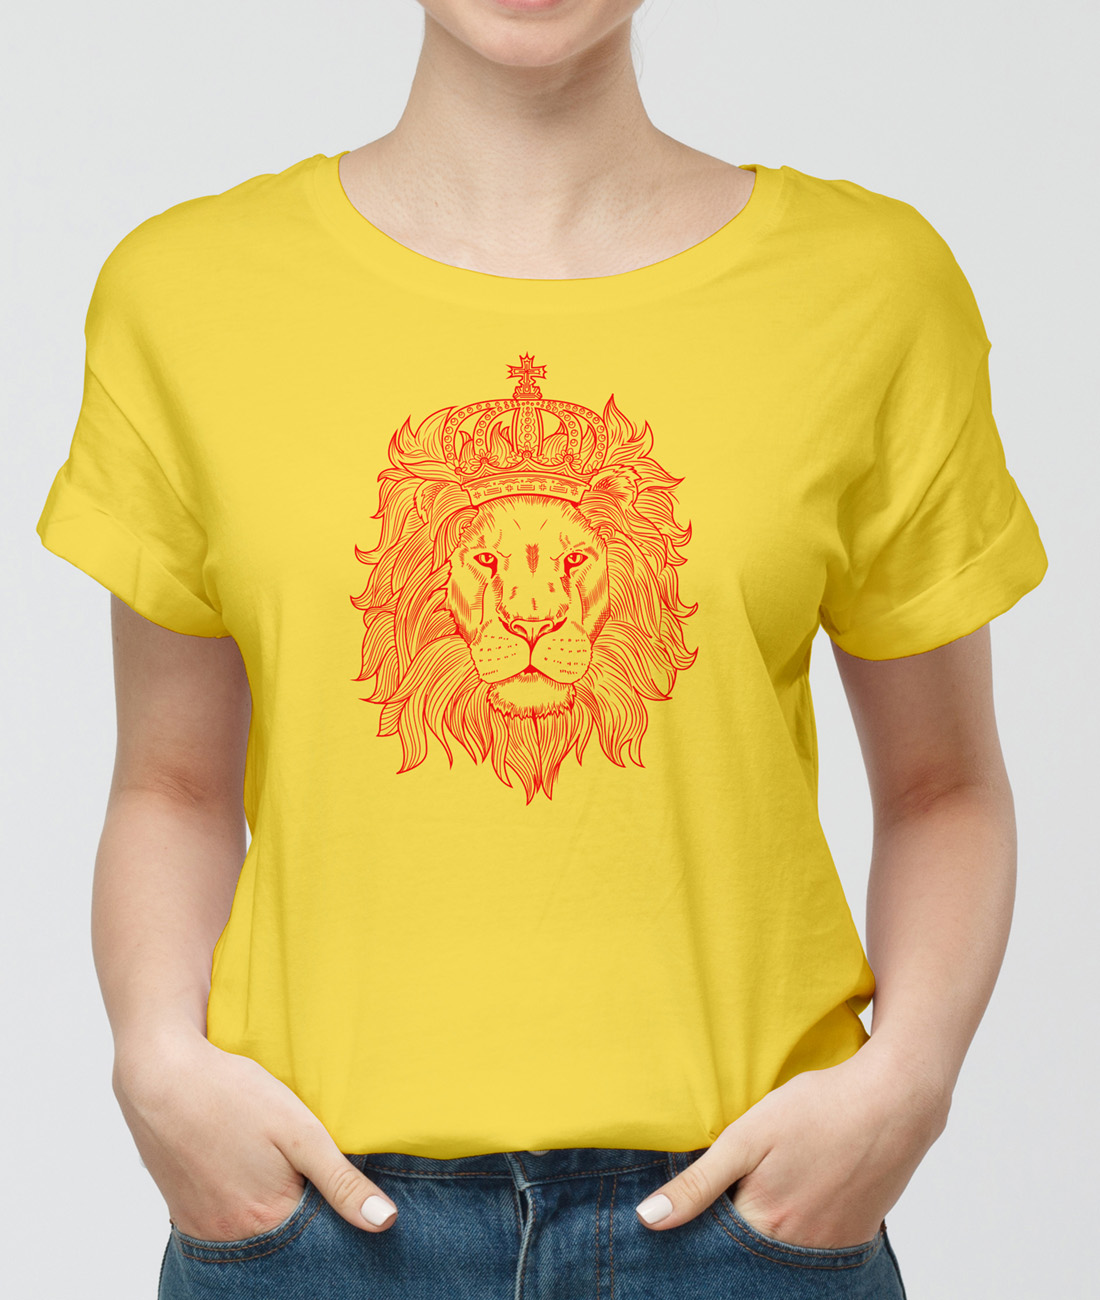 Tshirt with a lion